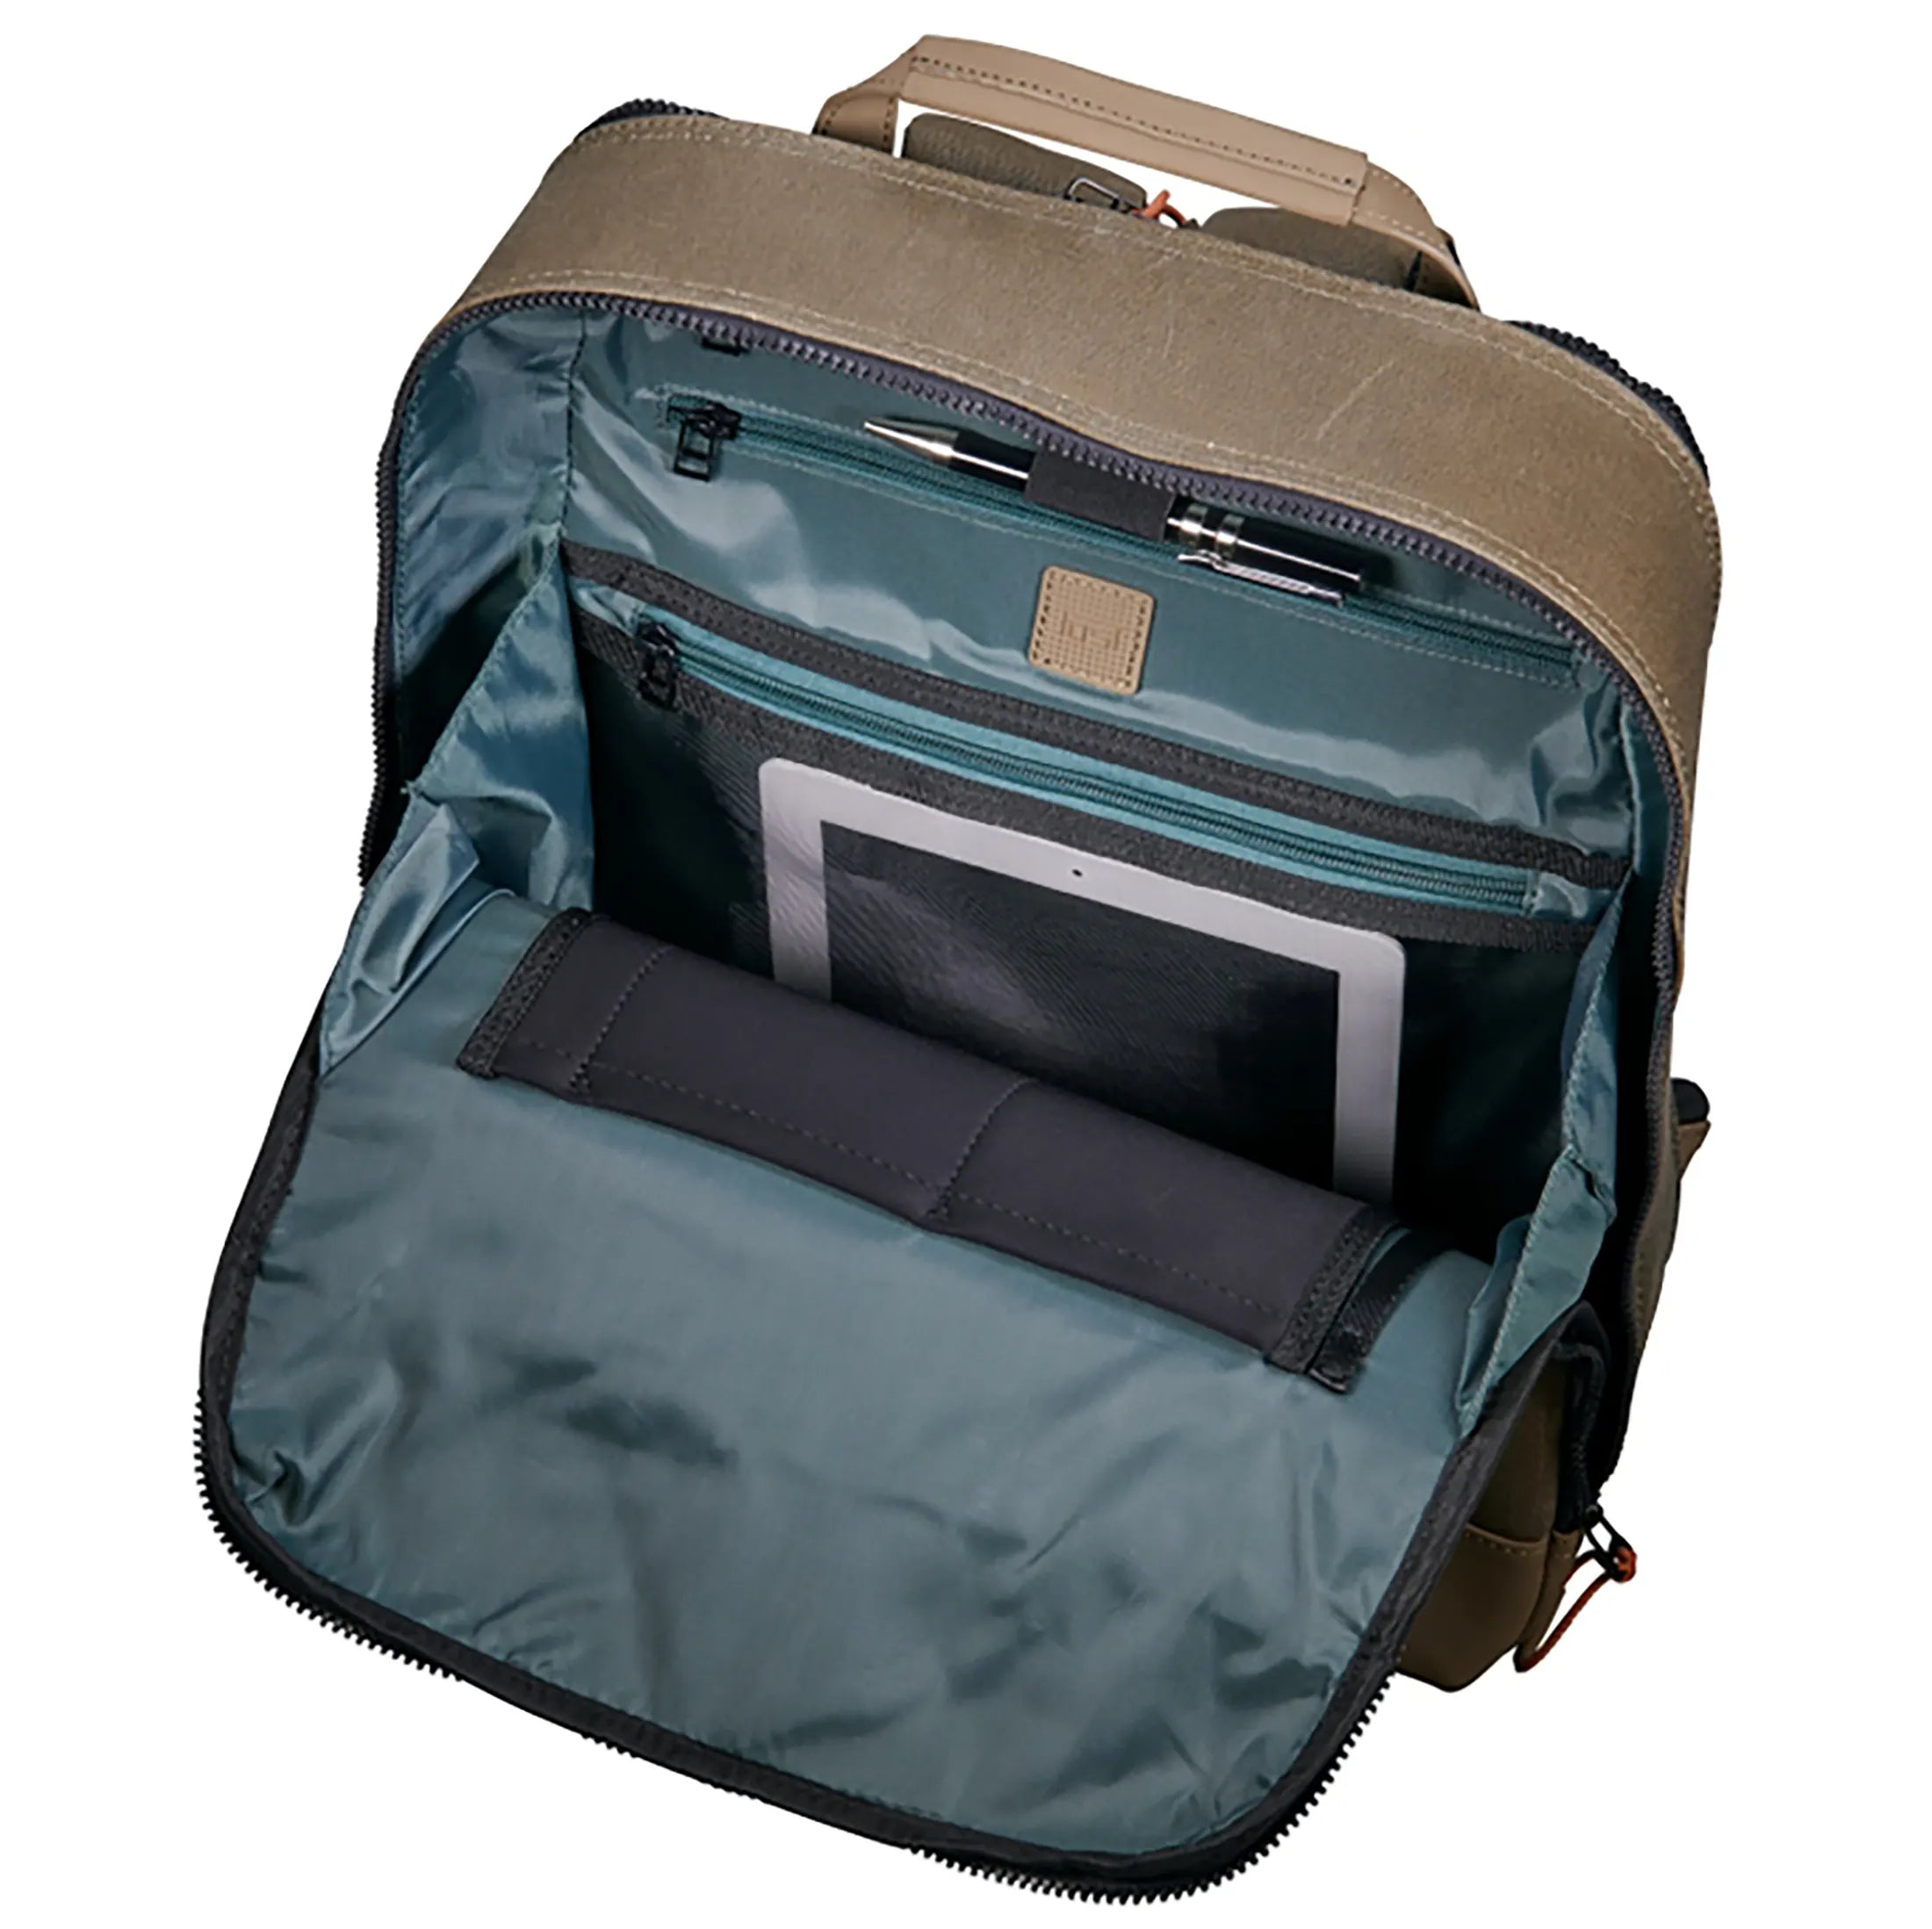 Jost Ystad daypack backpack with laptop compartment 44 cm - olive